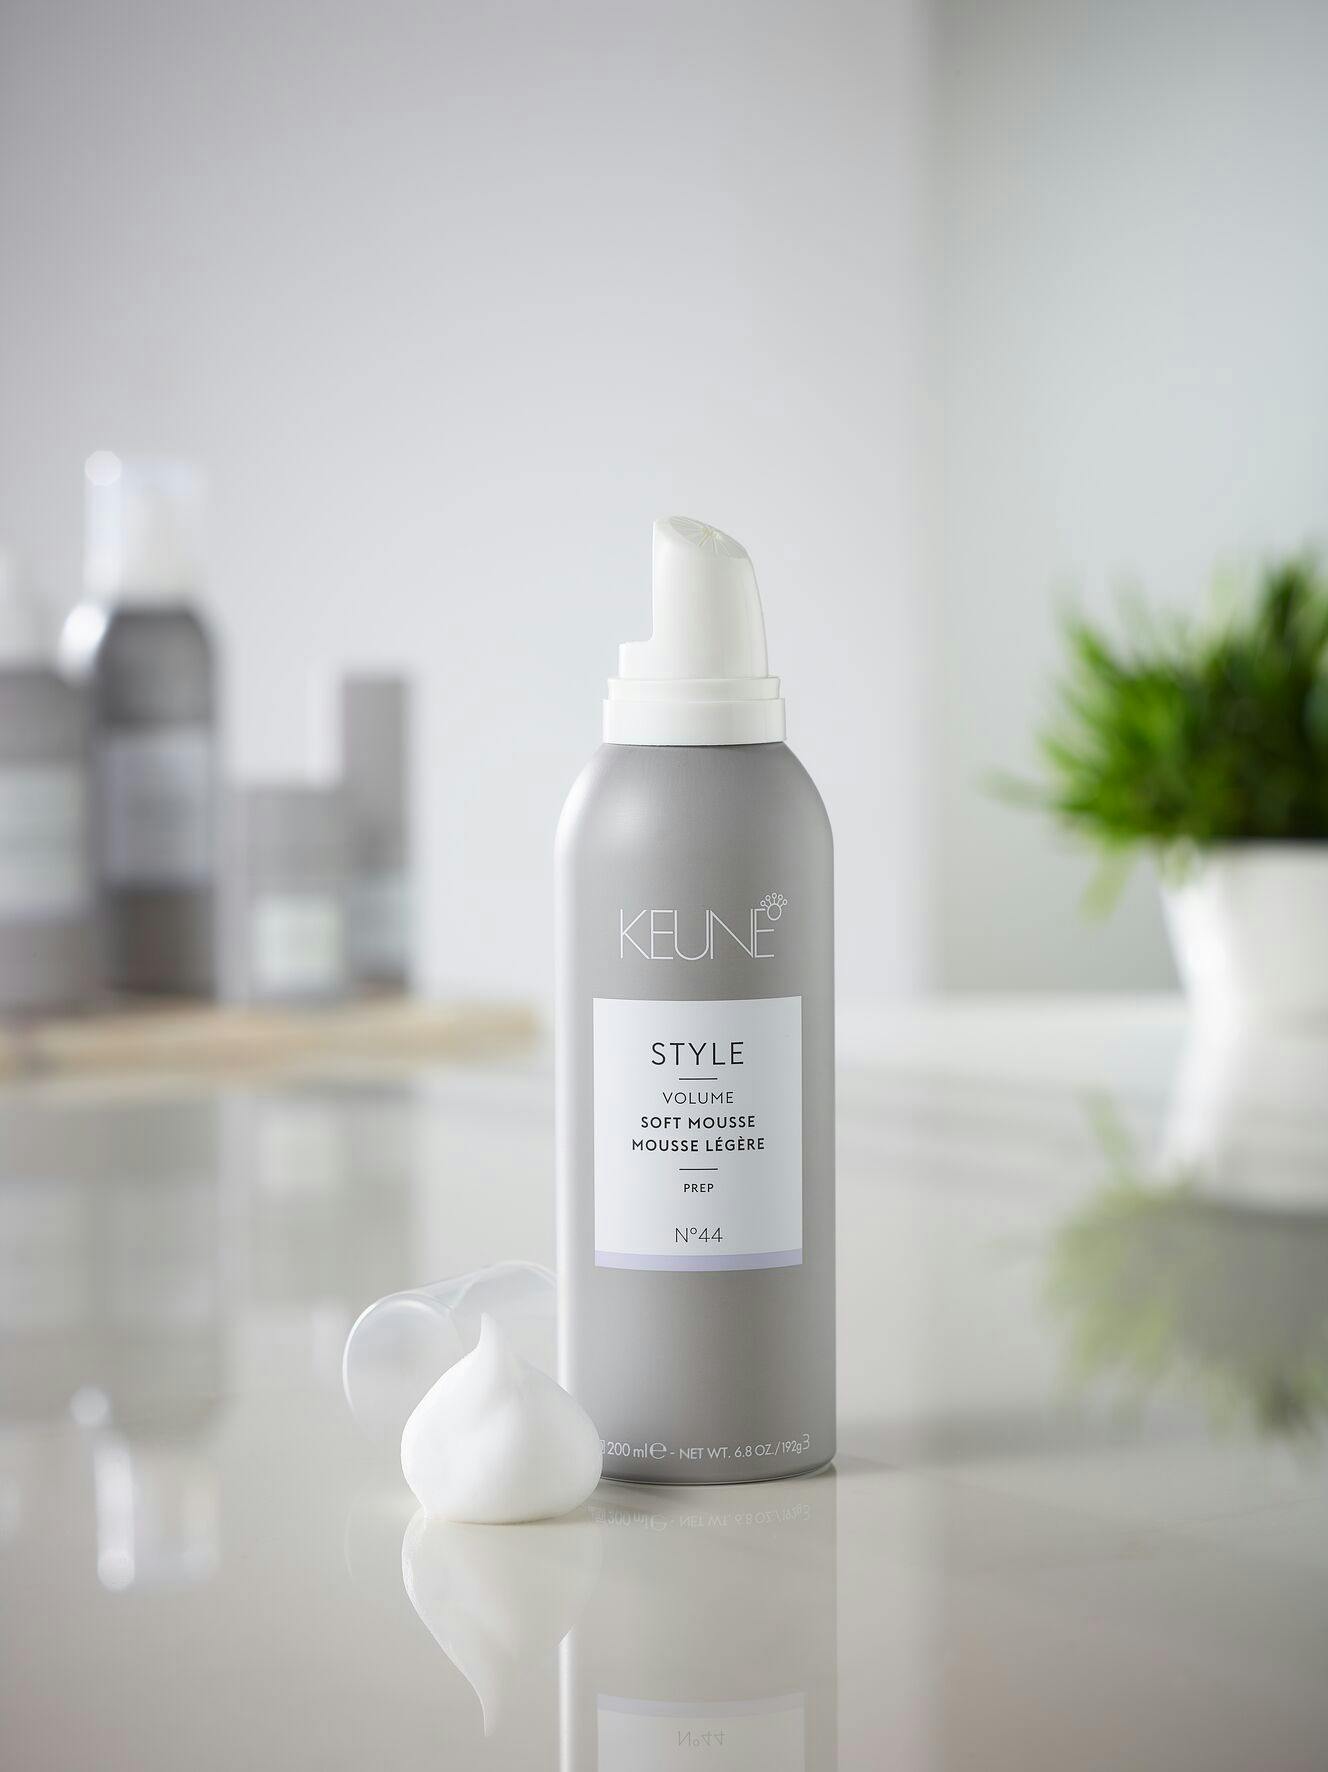 Image of bottle and texture Keune Style Soft Mousse